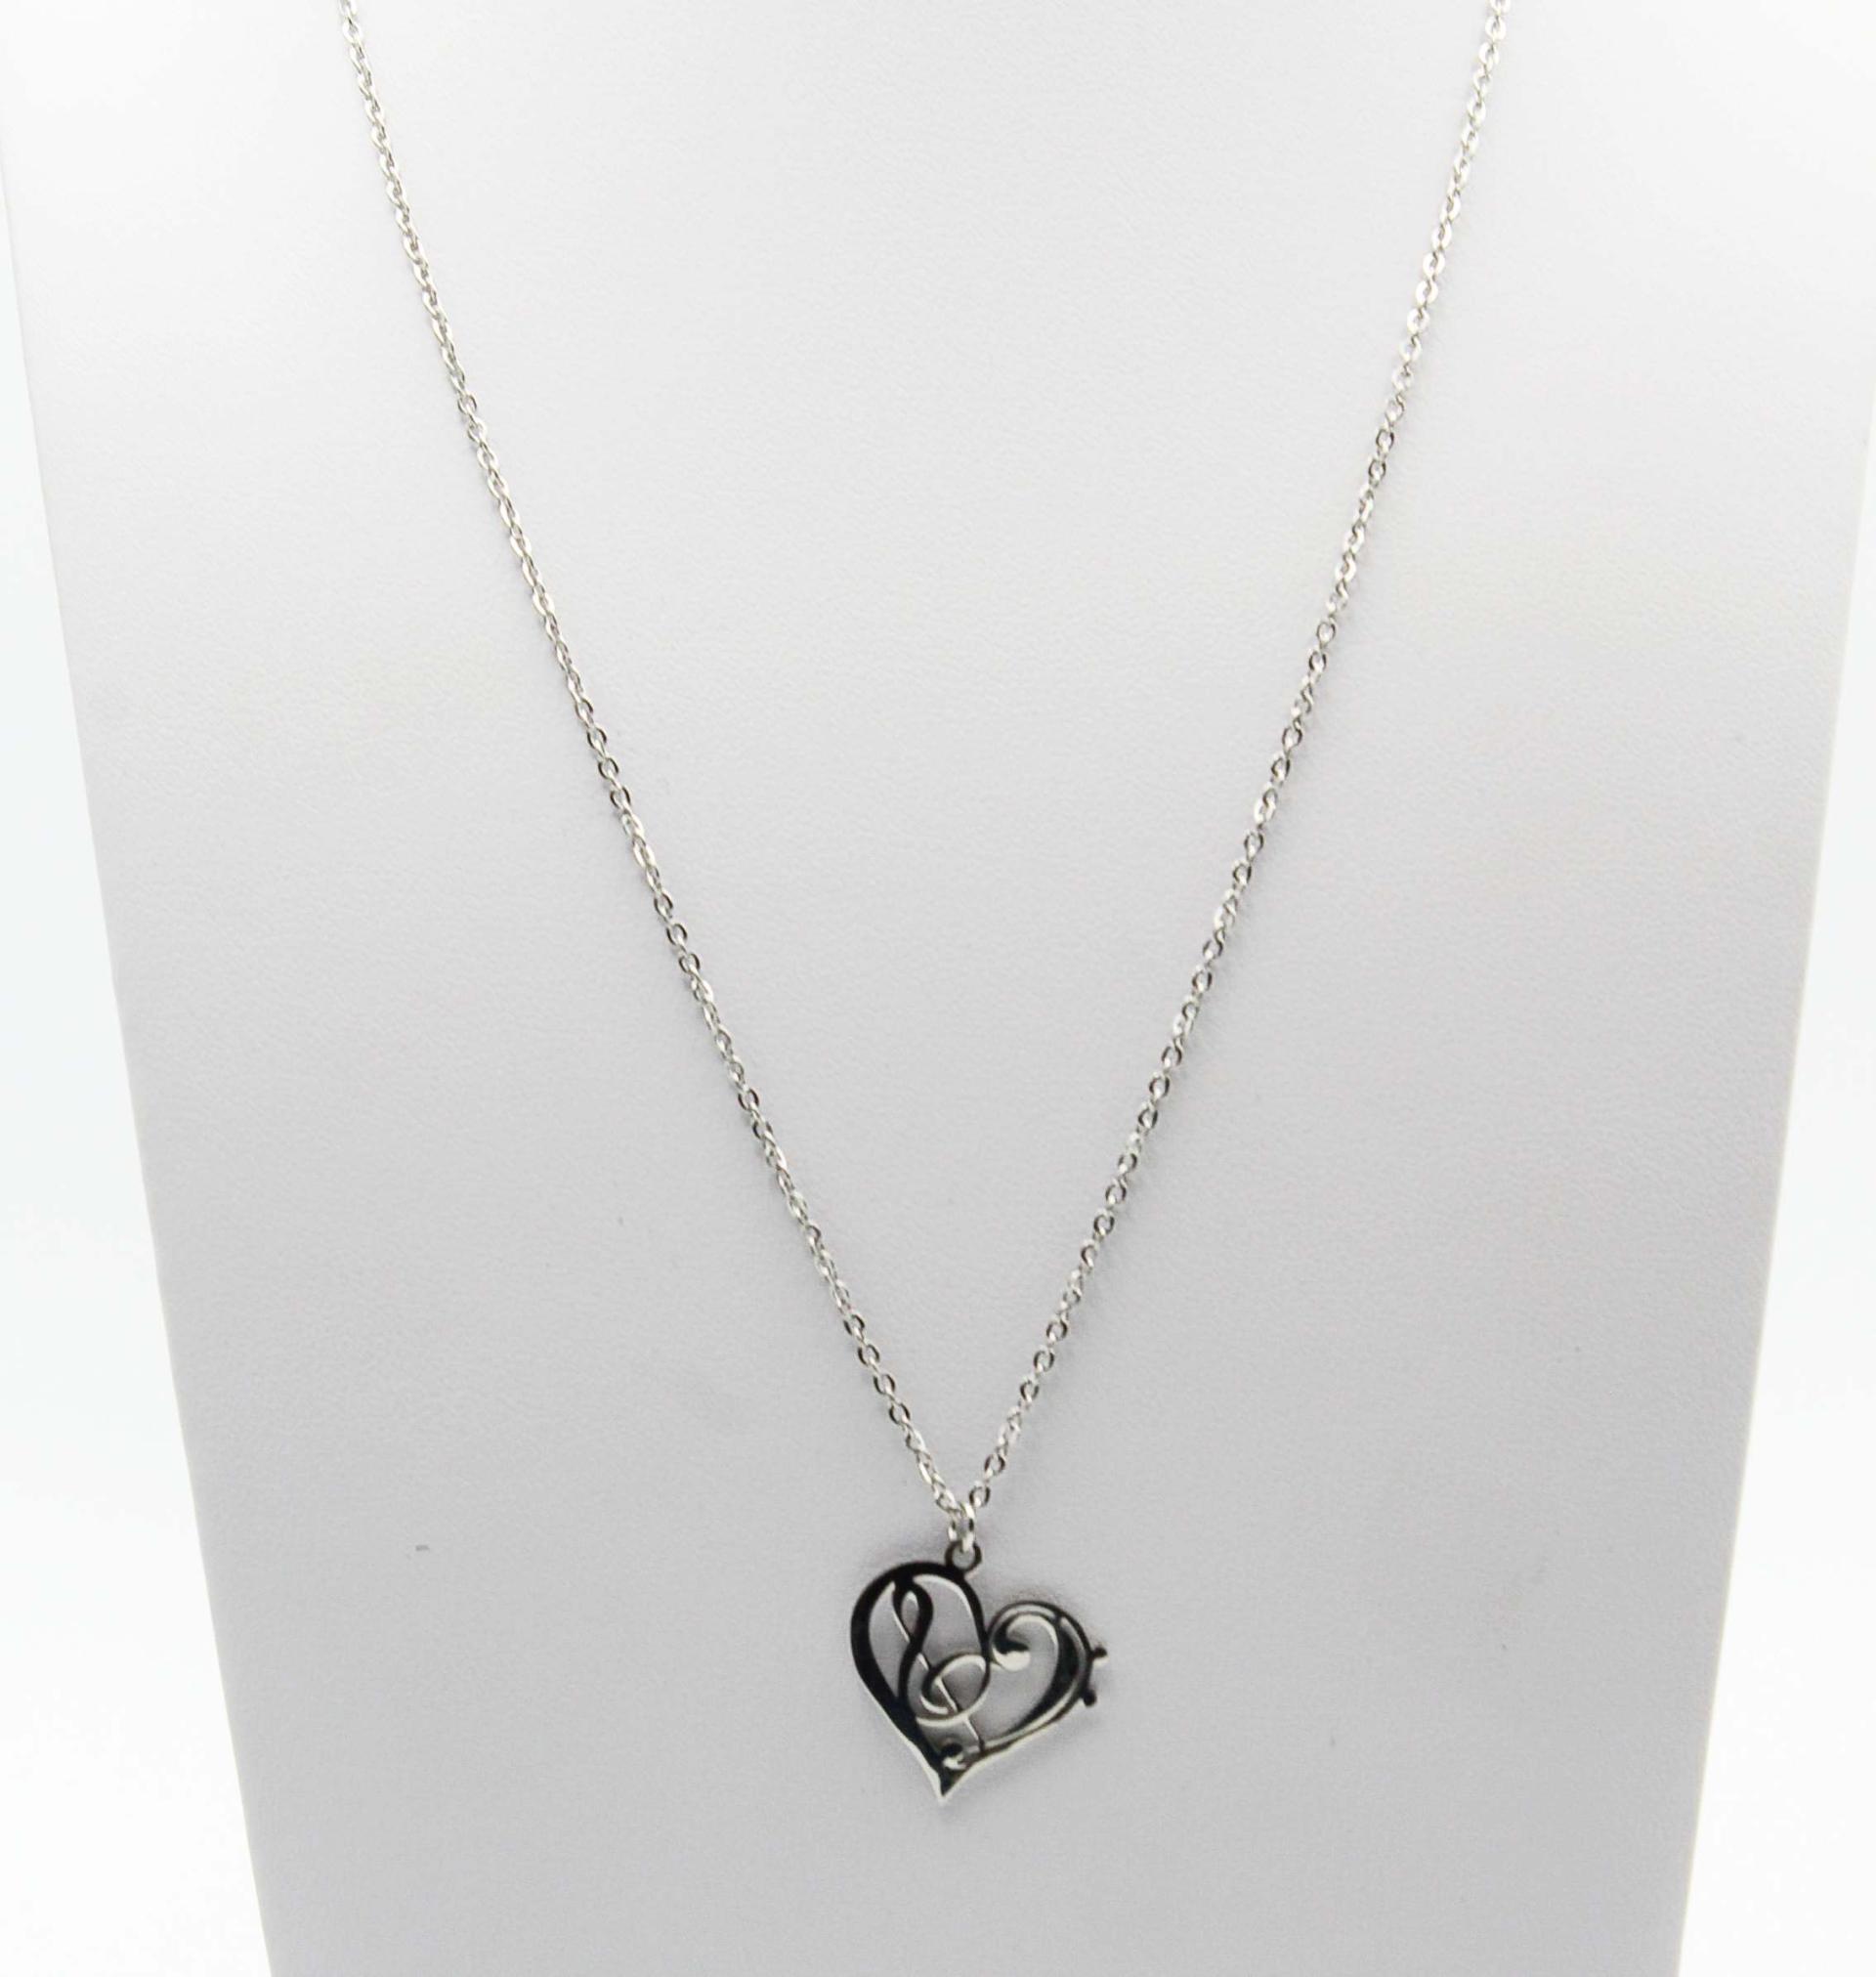 Heart Necklace with Bass and Treble Clef Fusion